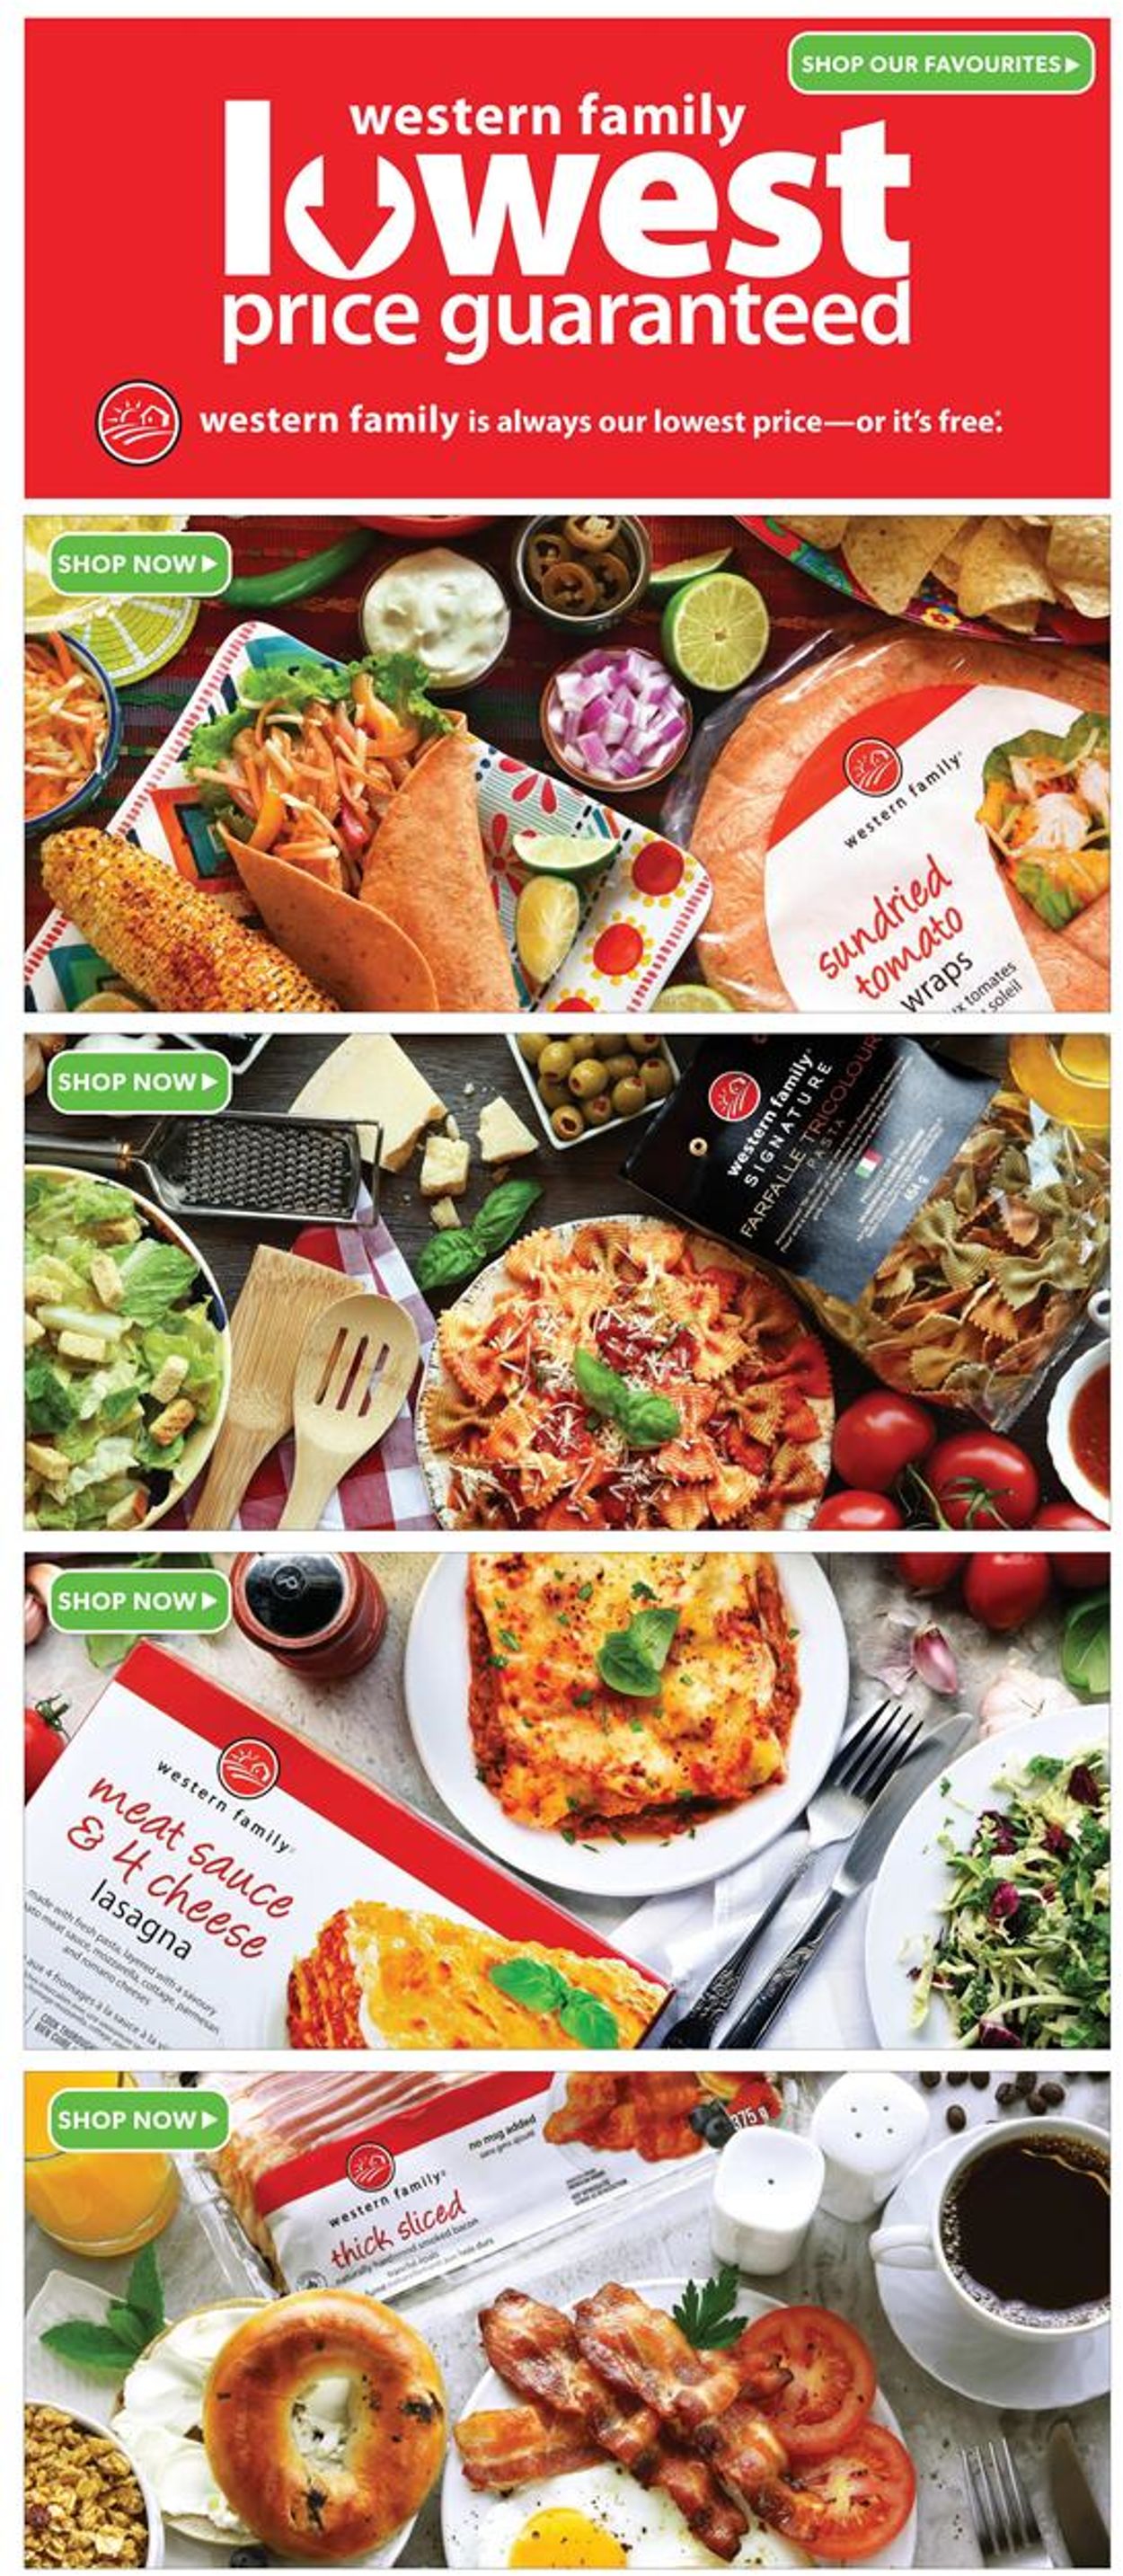 Save-On-Foods Flyer from 01/09/2020